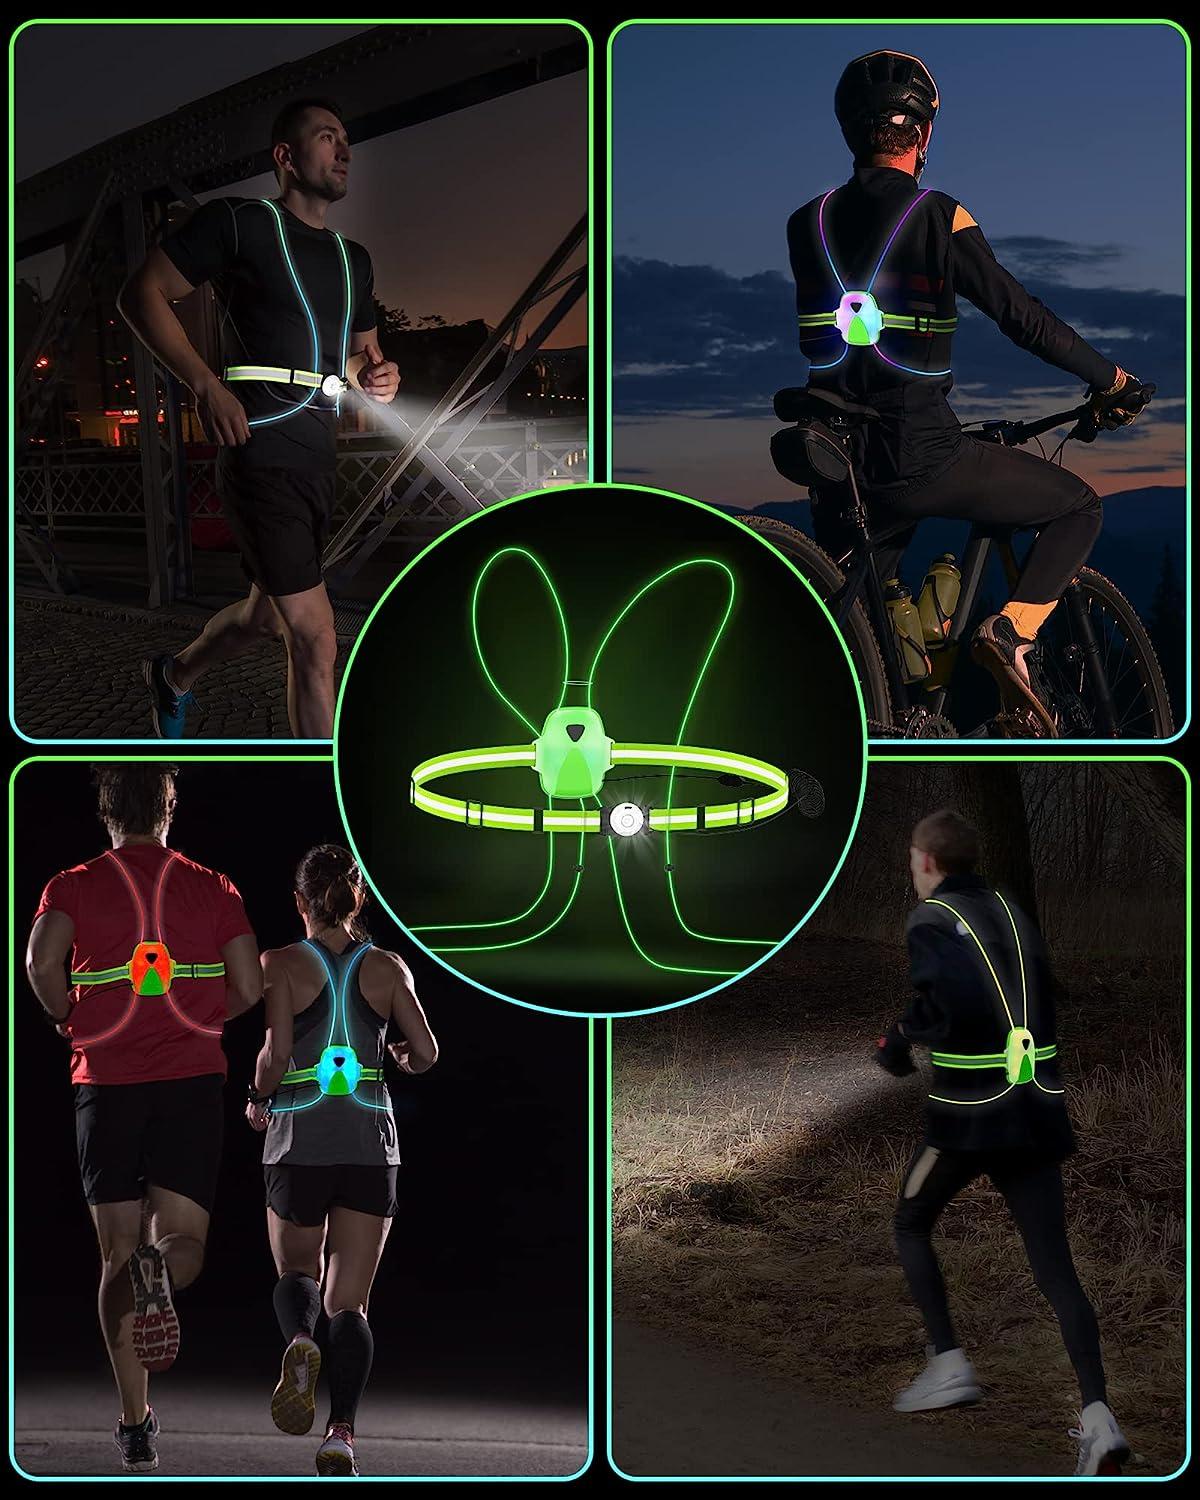 FIXEY AN Multicolor Running Lights for Runners, Rechargeable